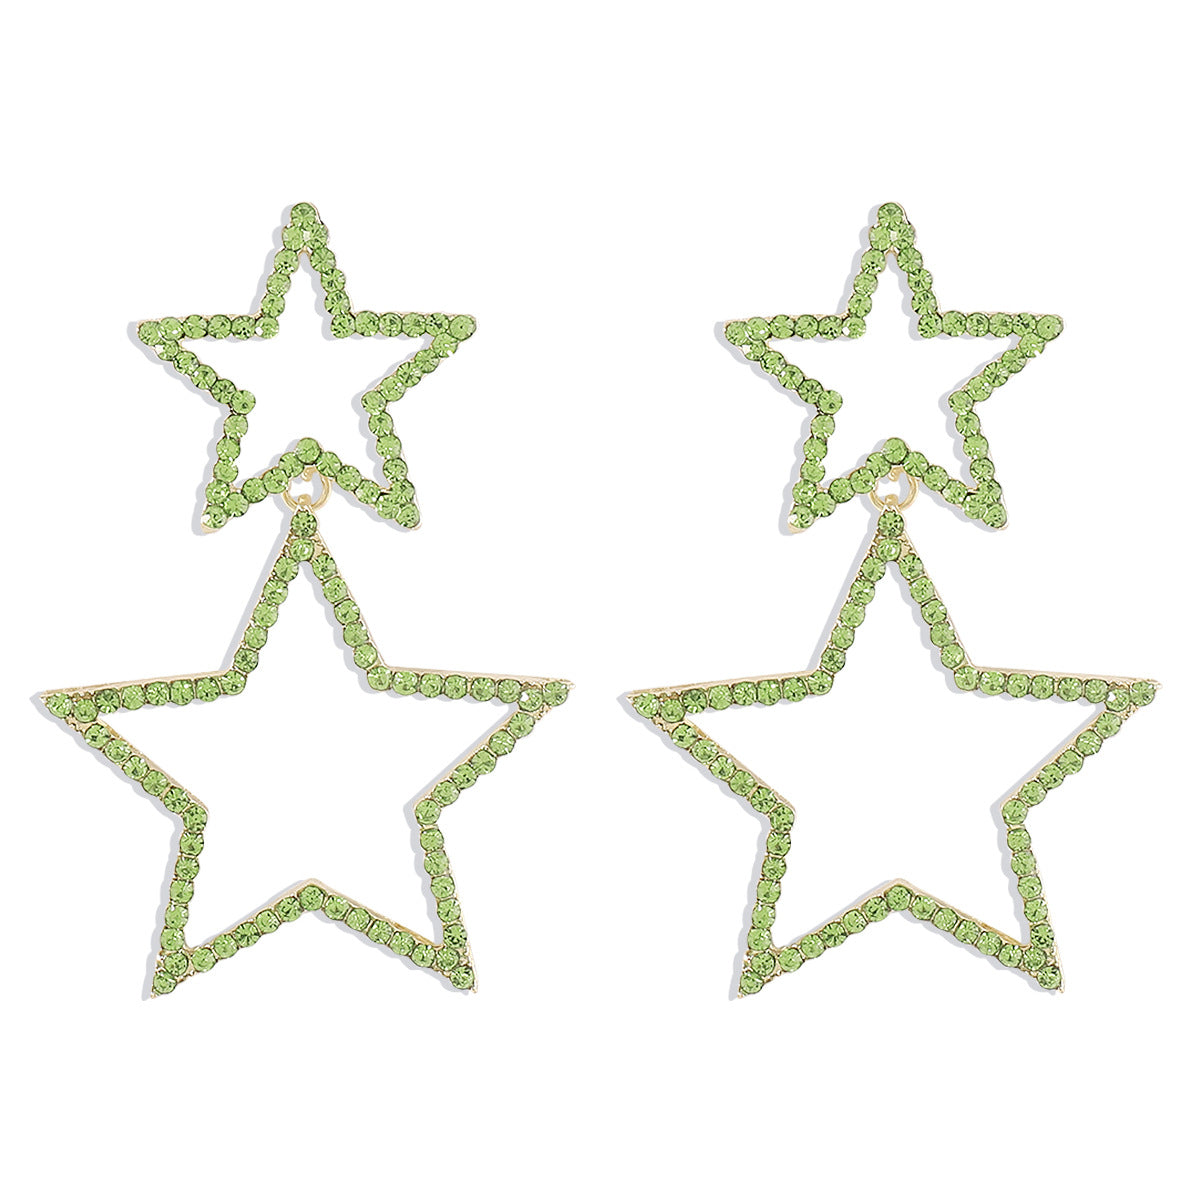 Rhinestone Earrings Five-pointed Star Double-layer Personality Fashion - Carvan Mart